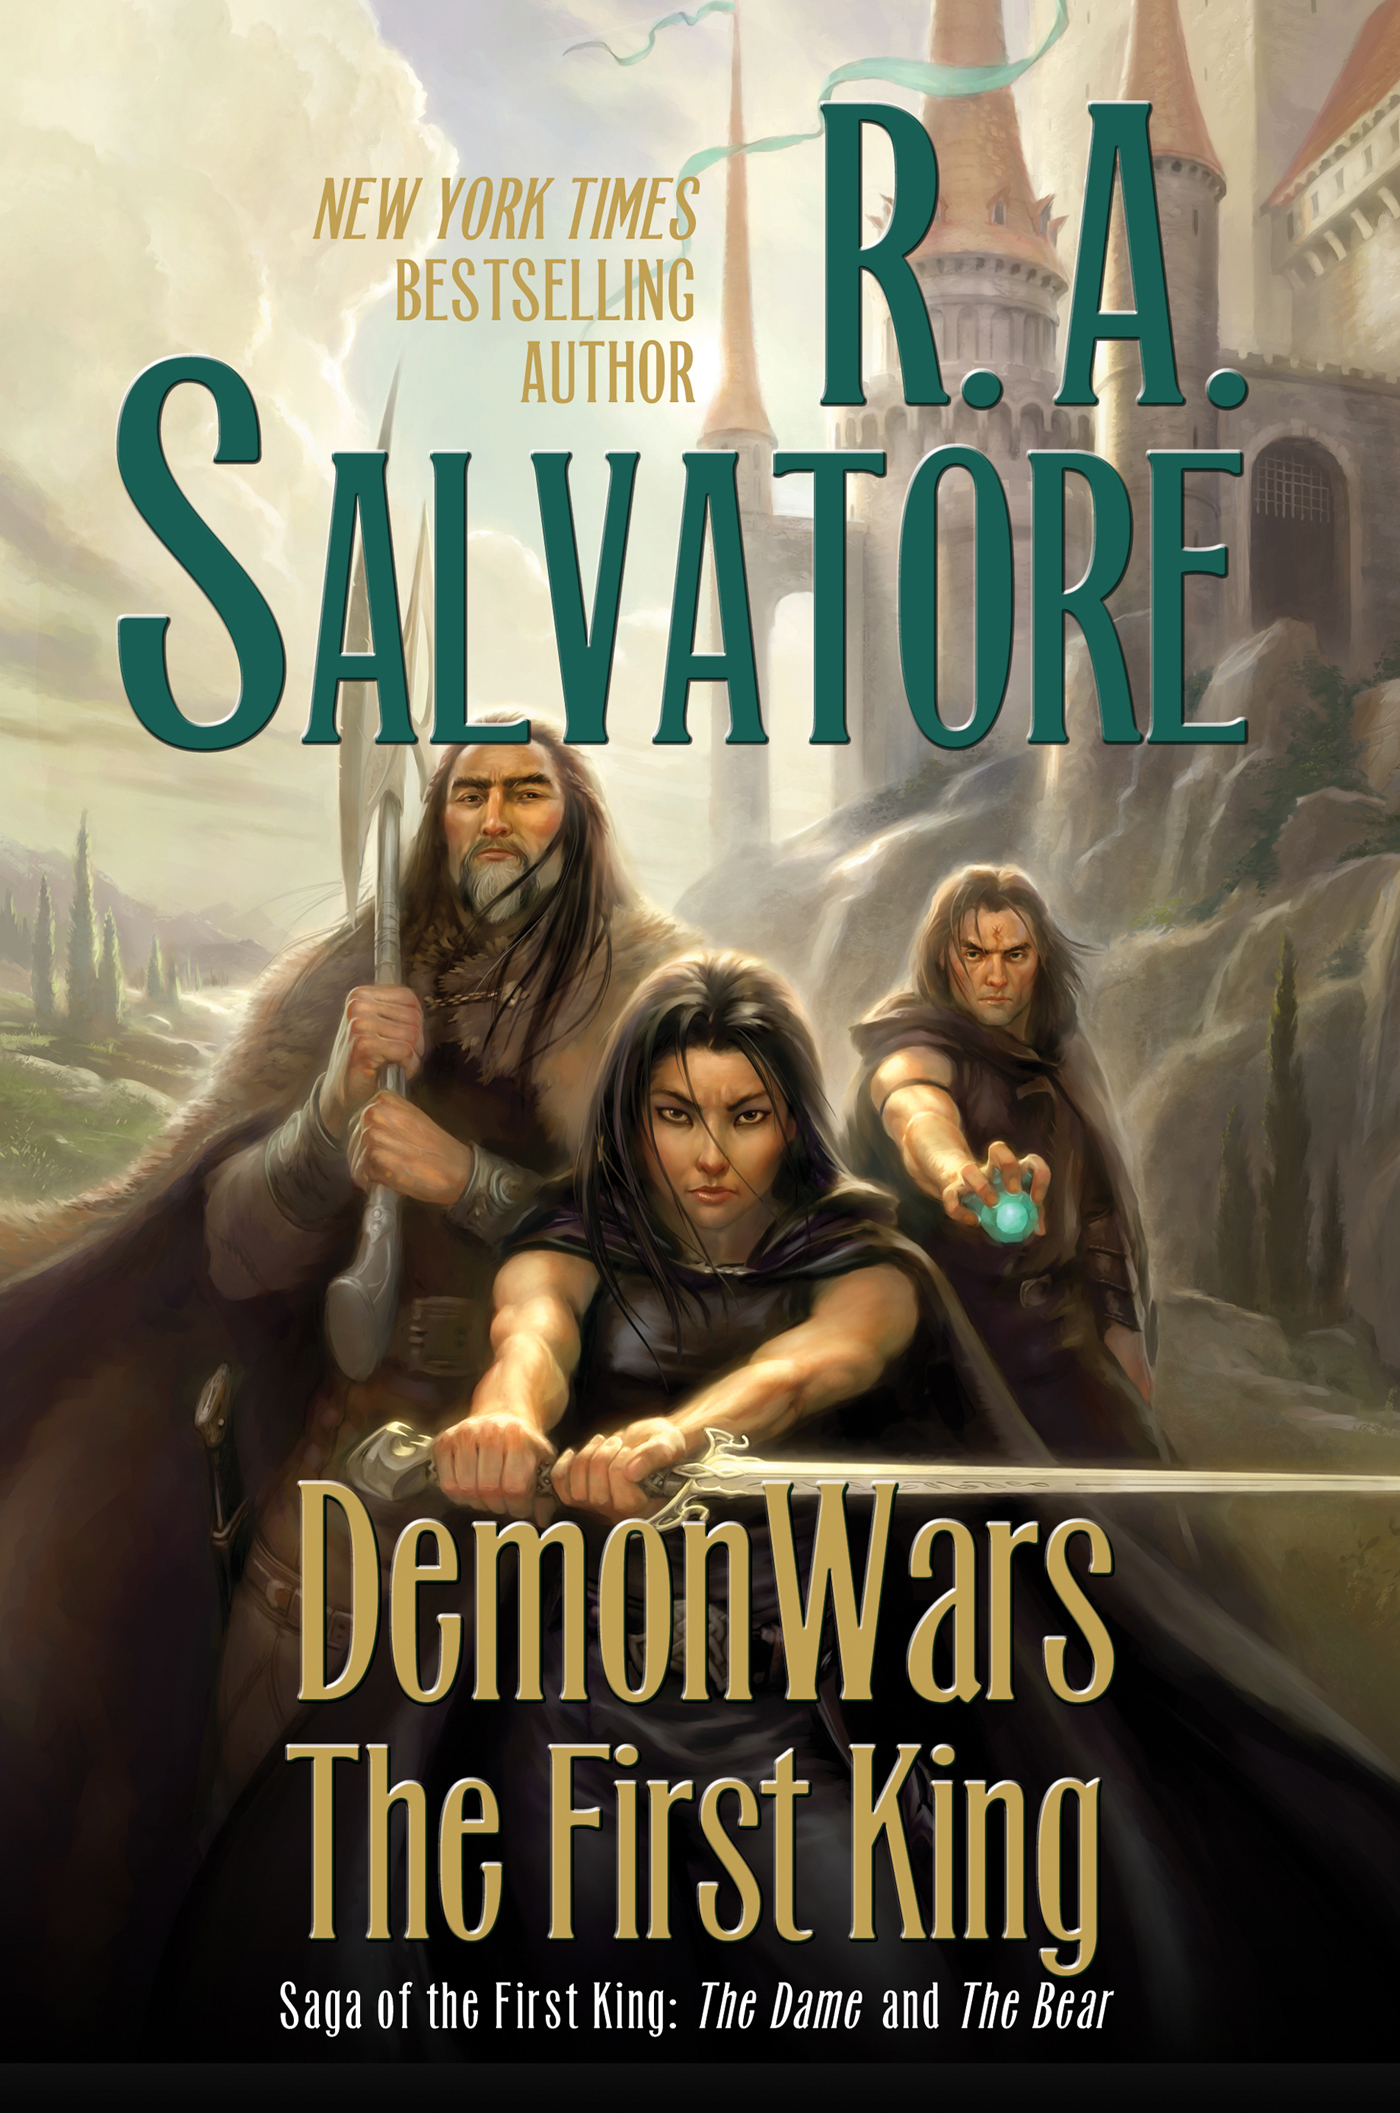 DemonWars: The First King : The Dame and The Bear by R. A. Salvatore